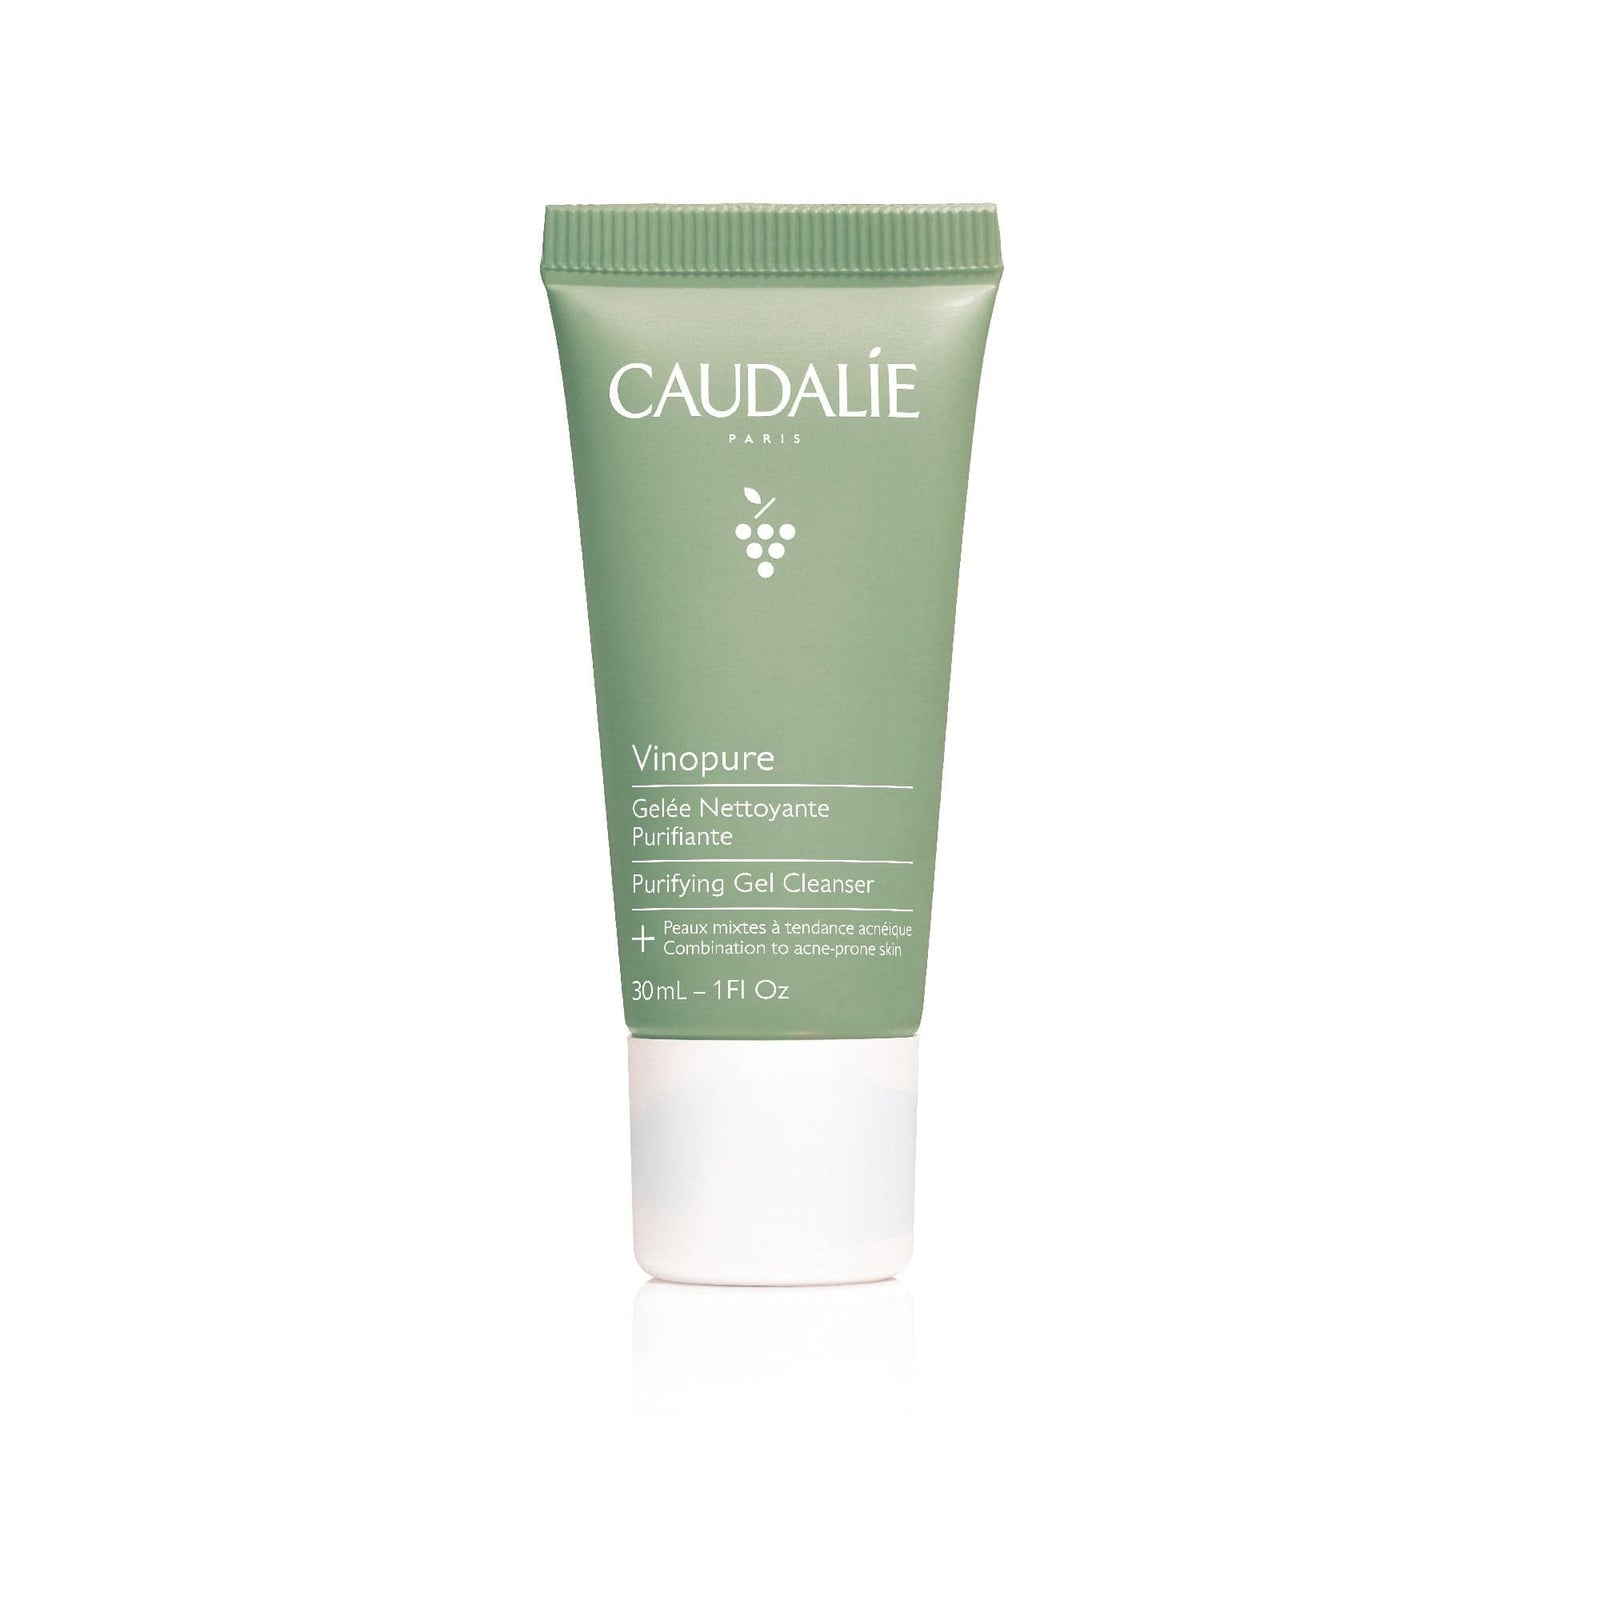 Caudalie:  Free Gift with Purchase